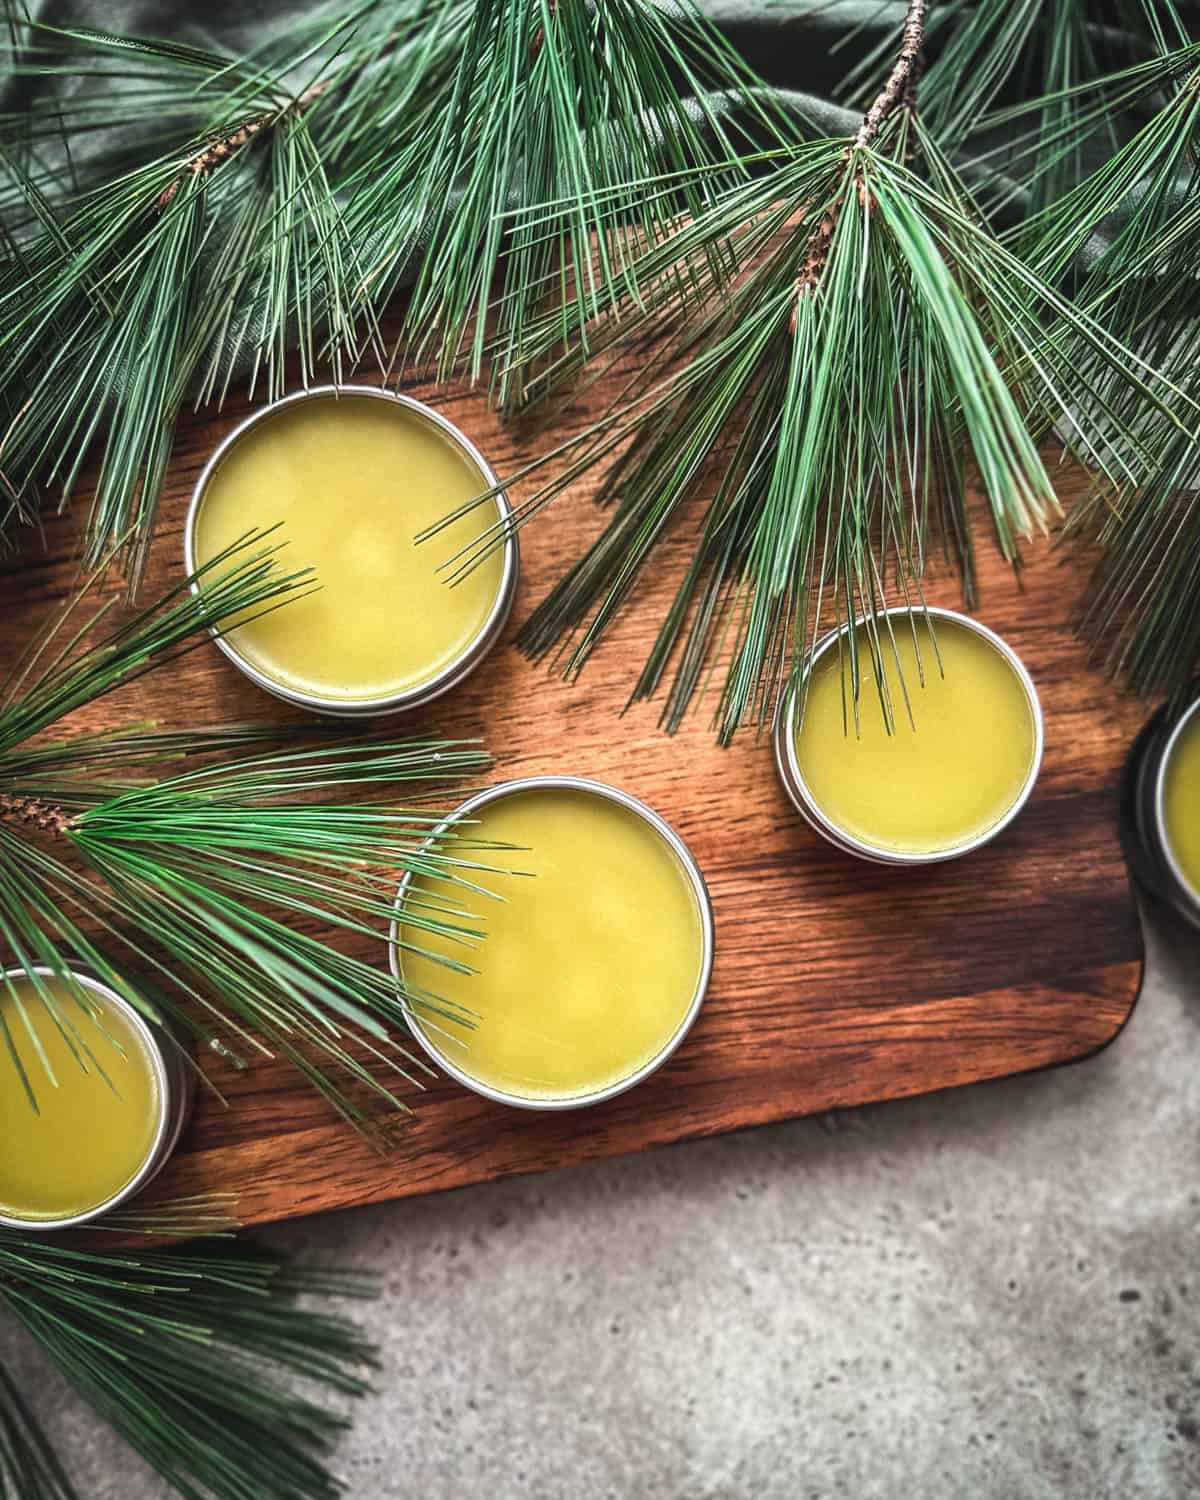 Pine salve in tins, on a wood cutting board surrounded by pine fronds.